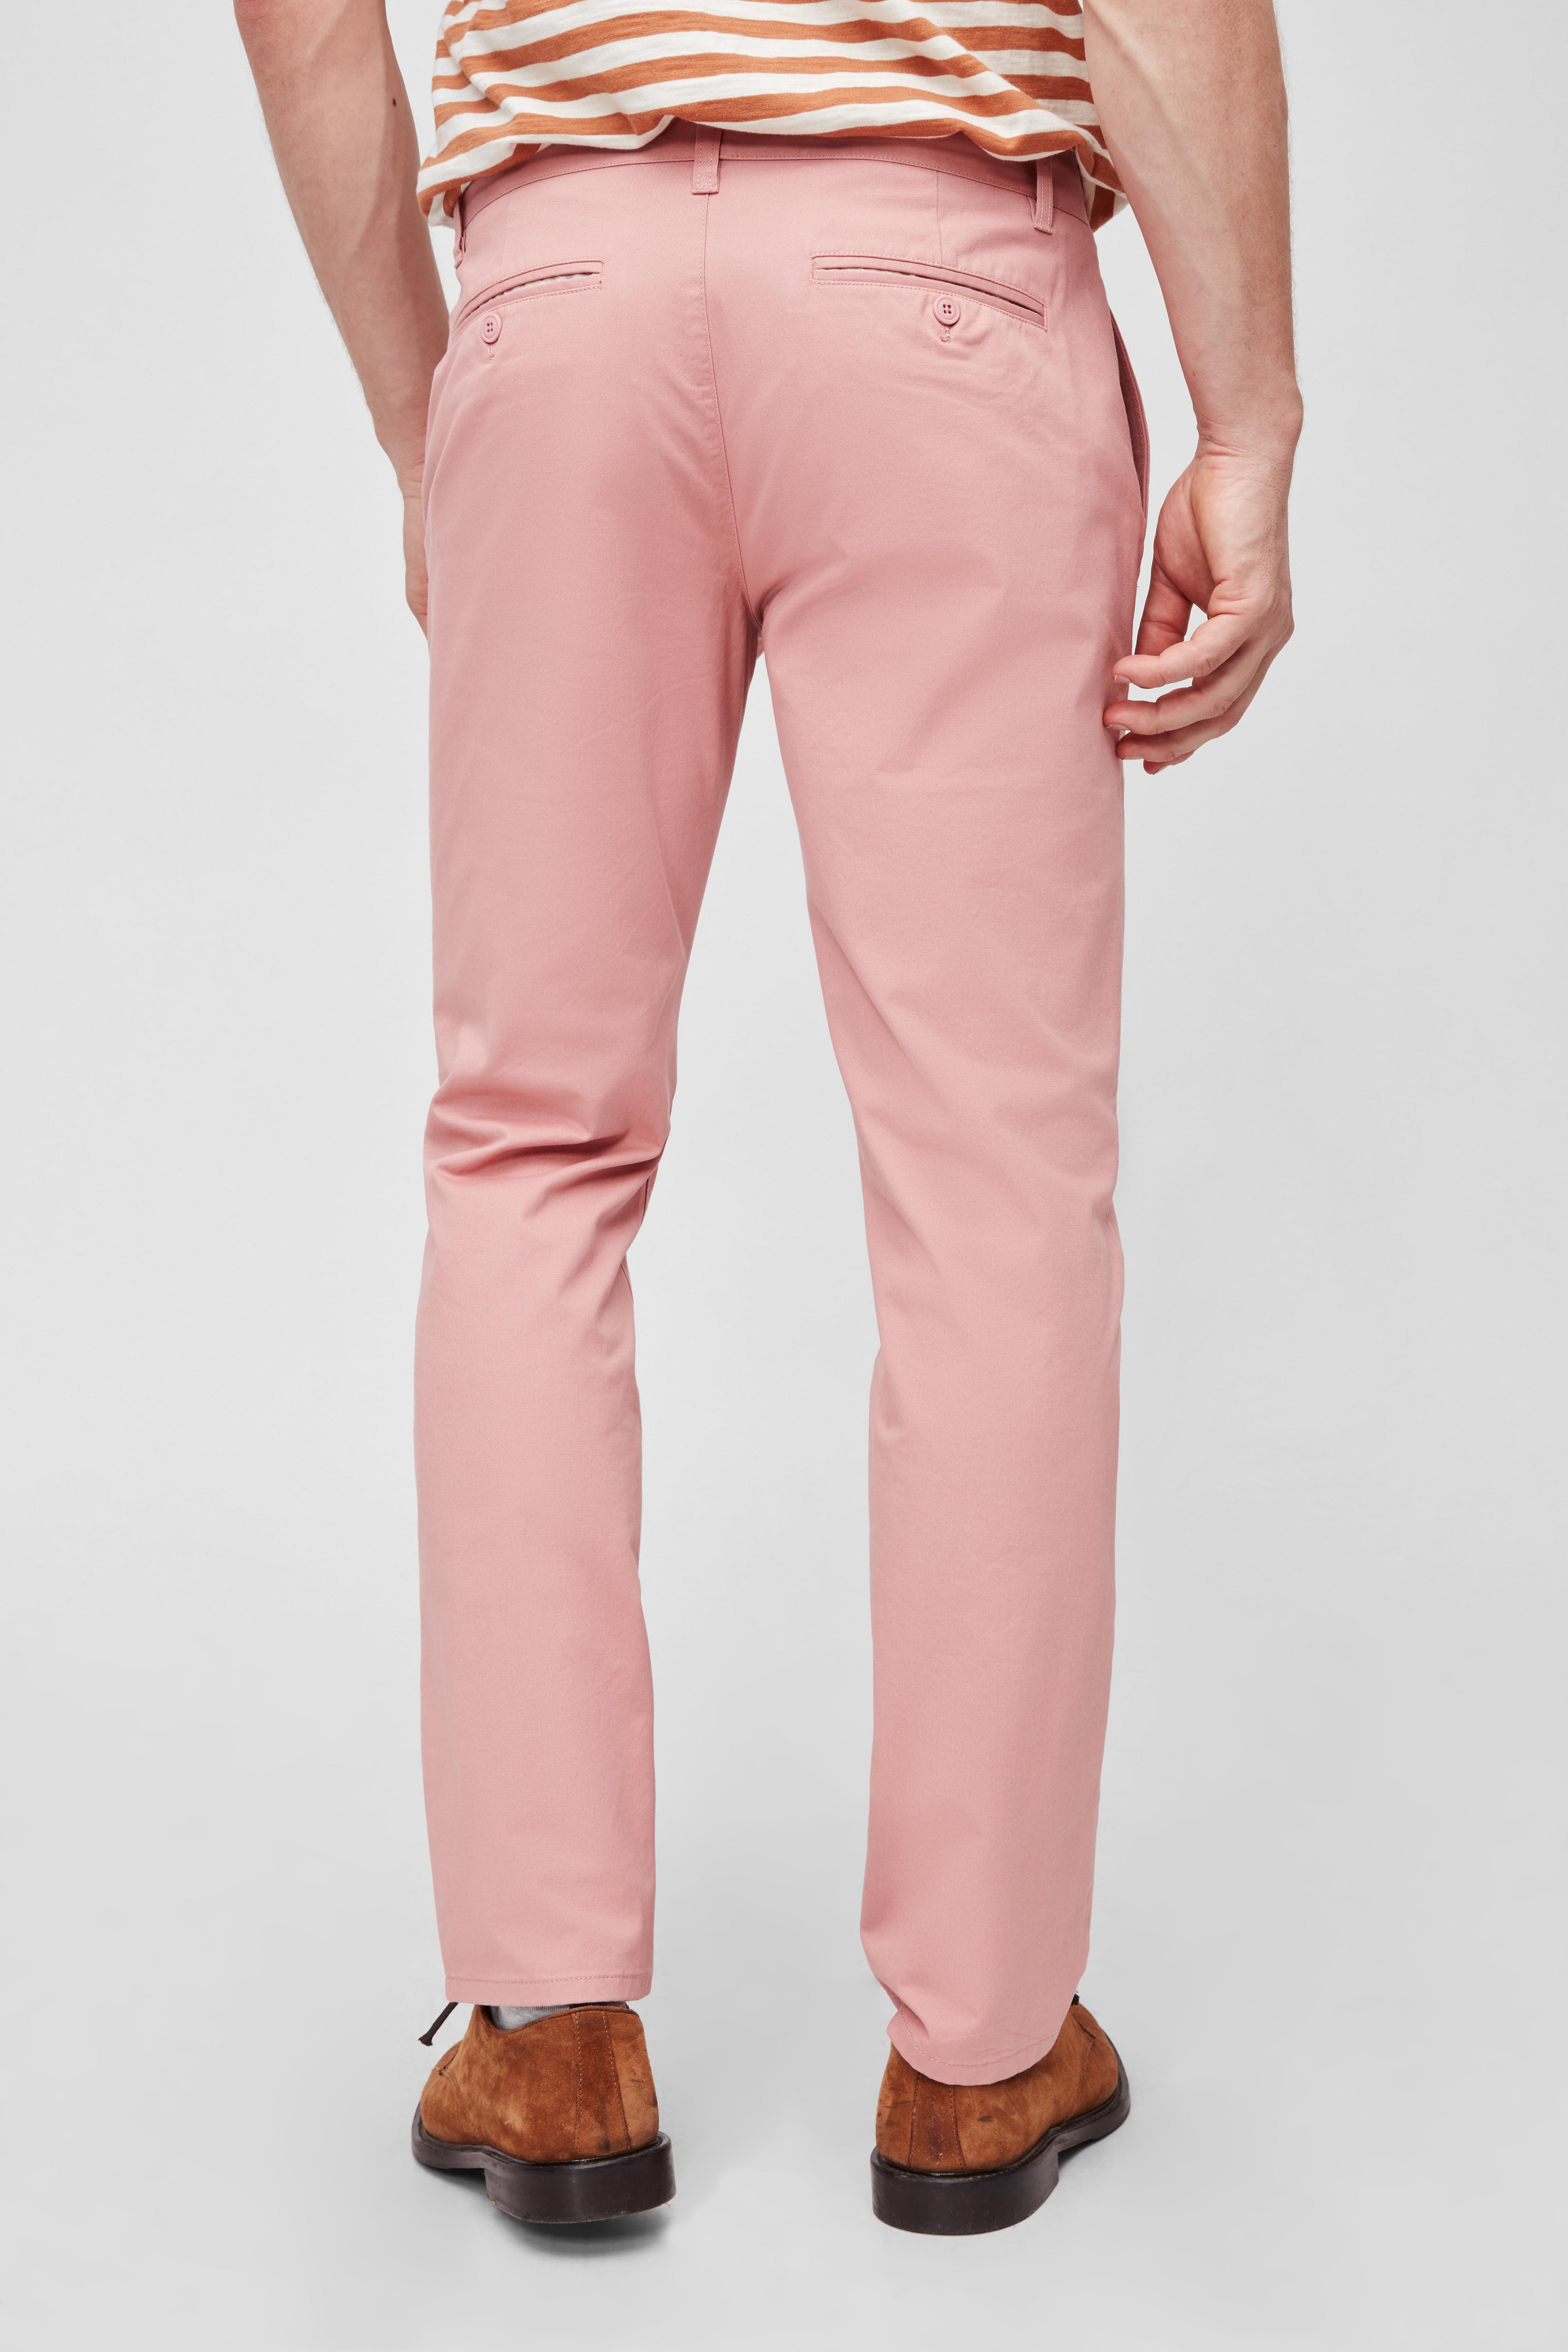 Bonobos Cotton Stretch Washed Chinos in Pink for Men - Lyst